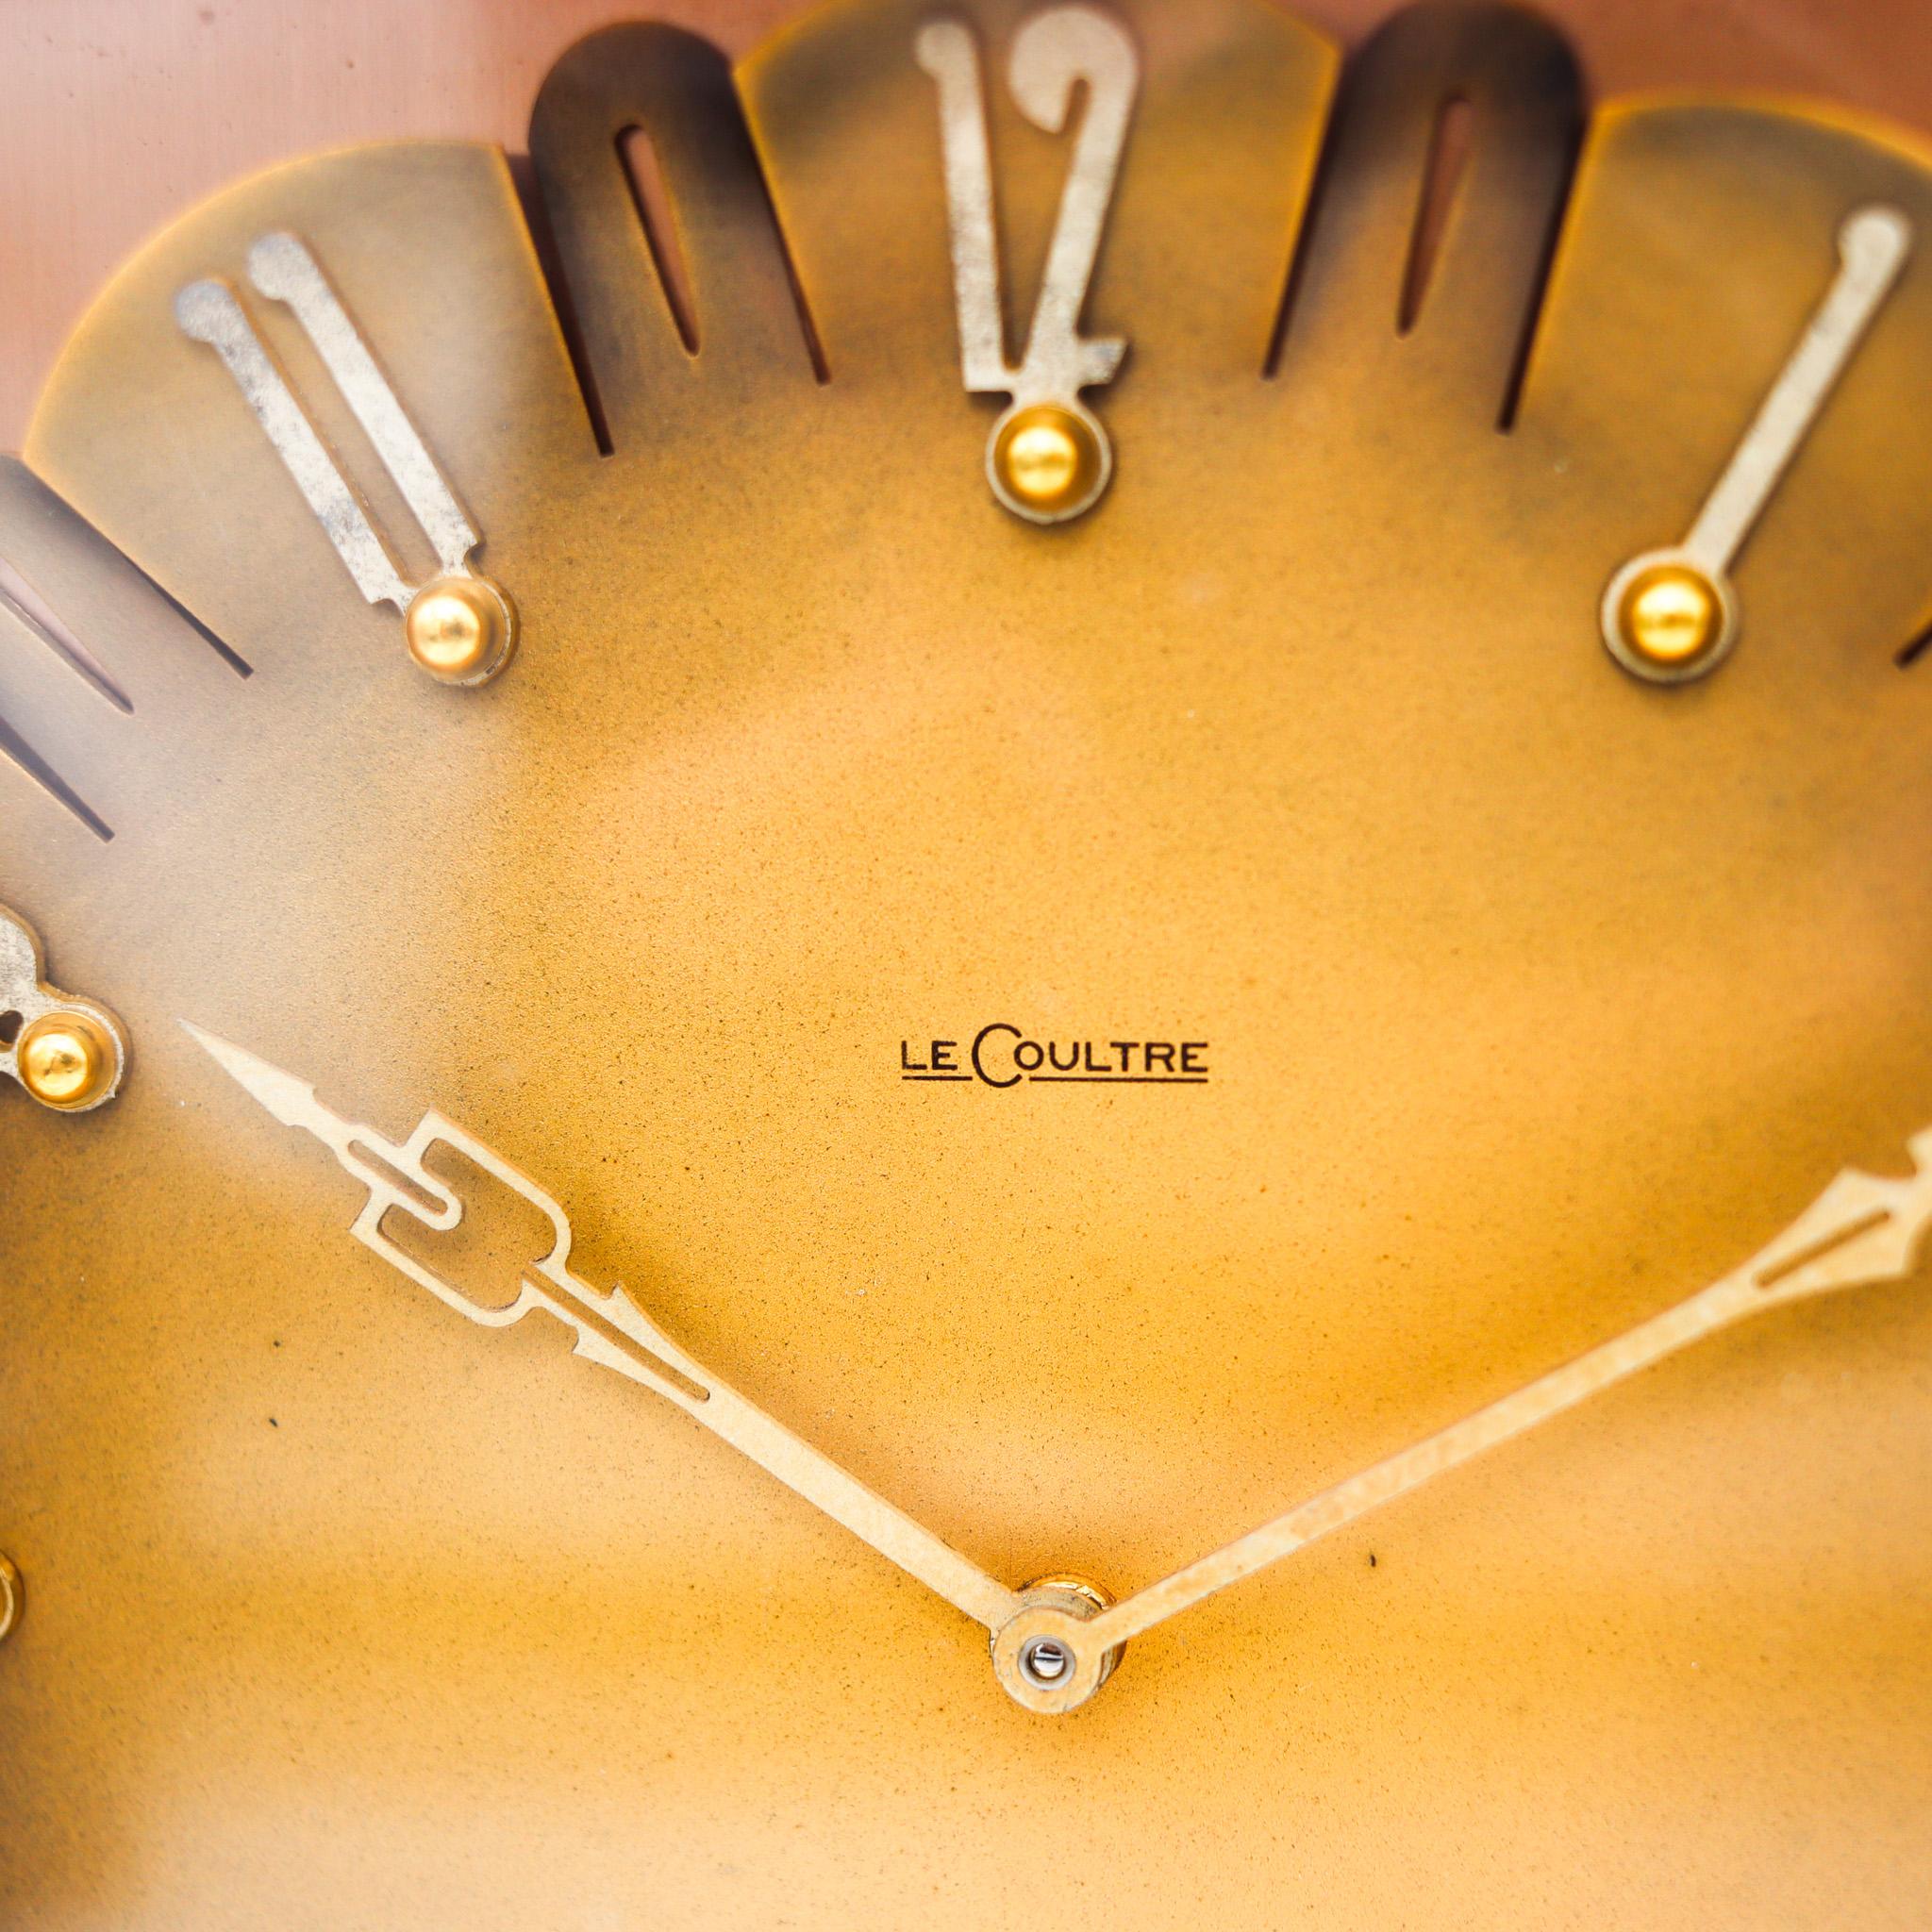 Jaeger LeCoultre 1950 Swiss Retro Modernist Mechanical Desk Clock Near Mint In Excellent Condition For Sale In Miami, FL